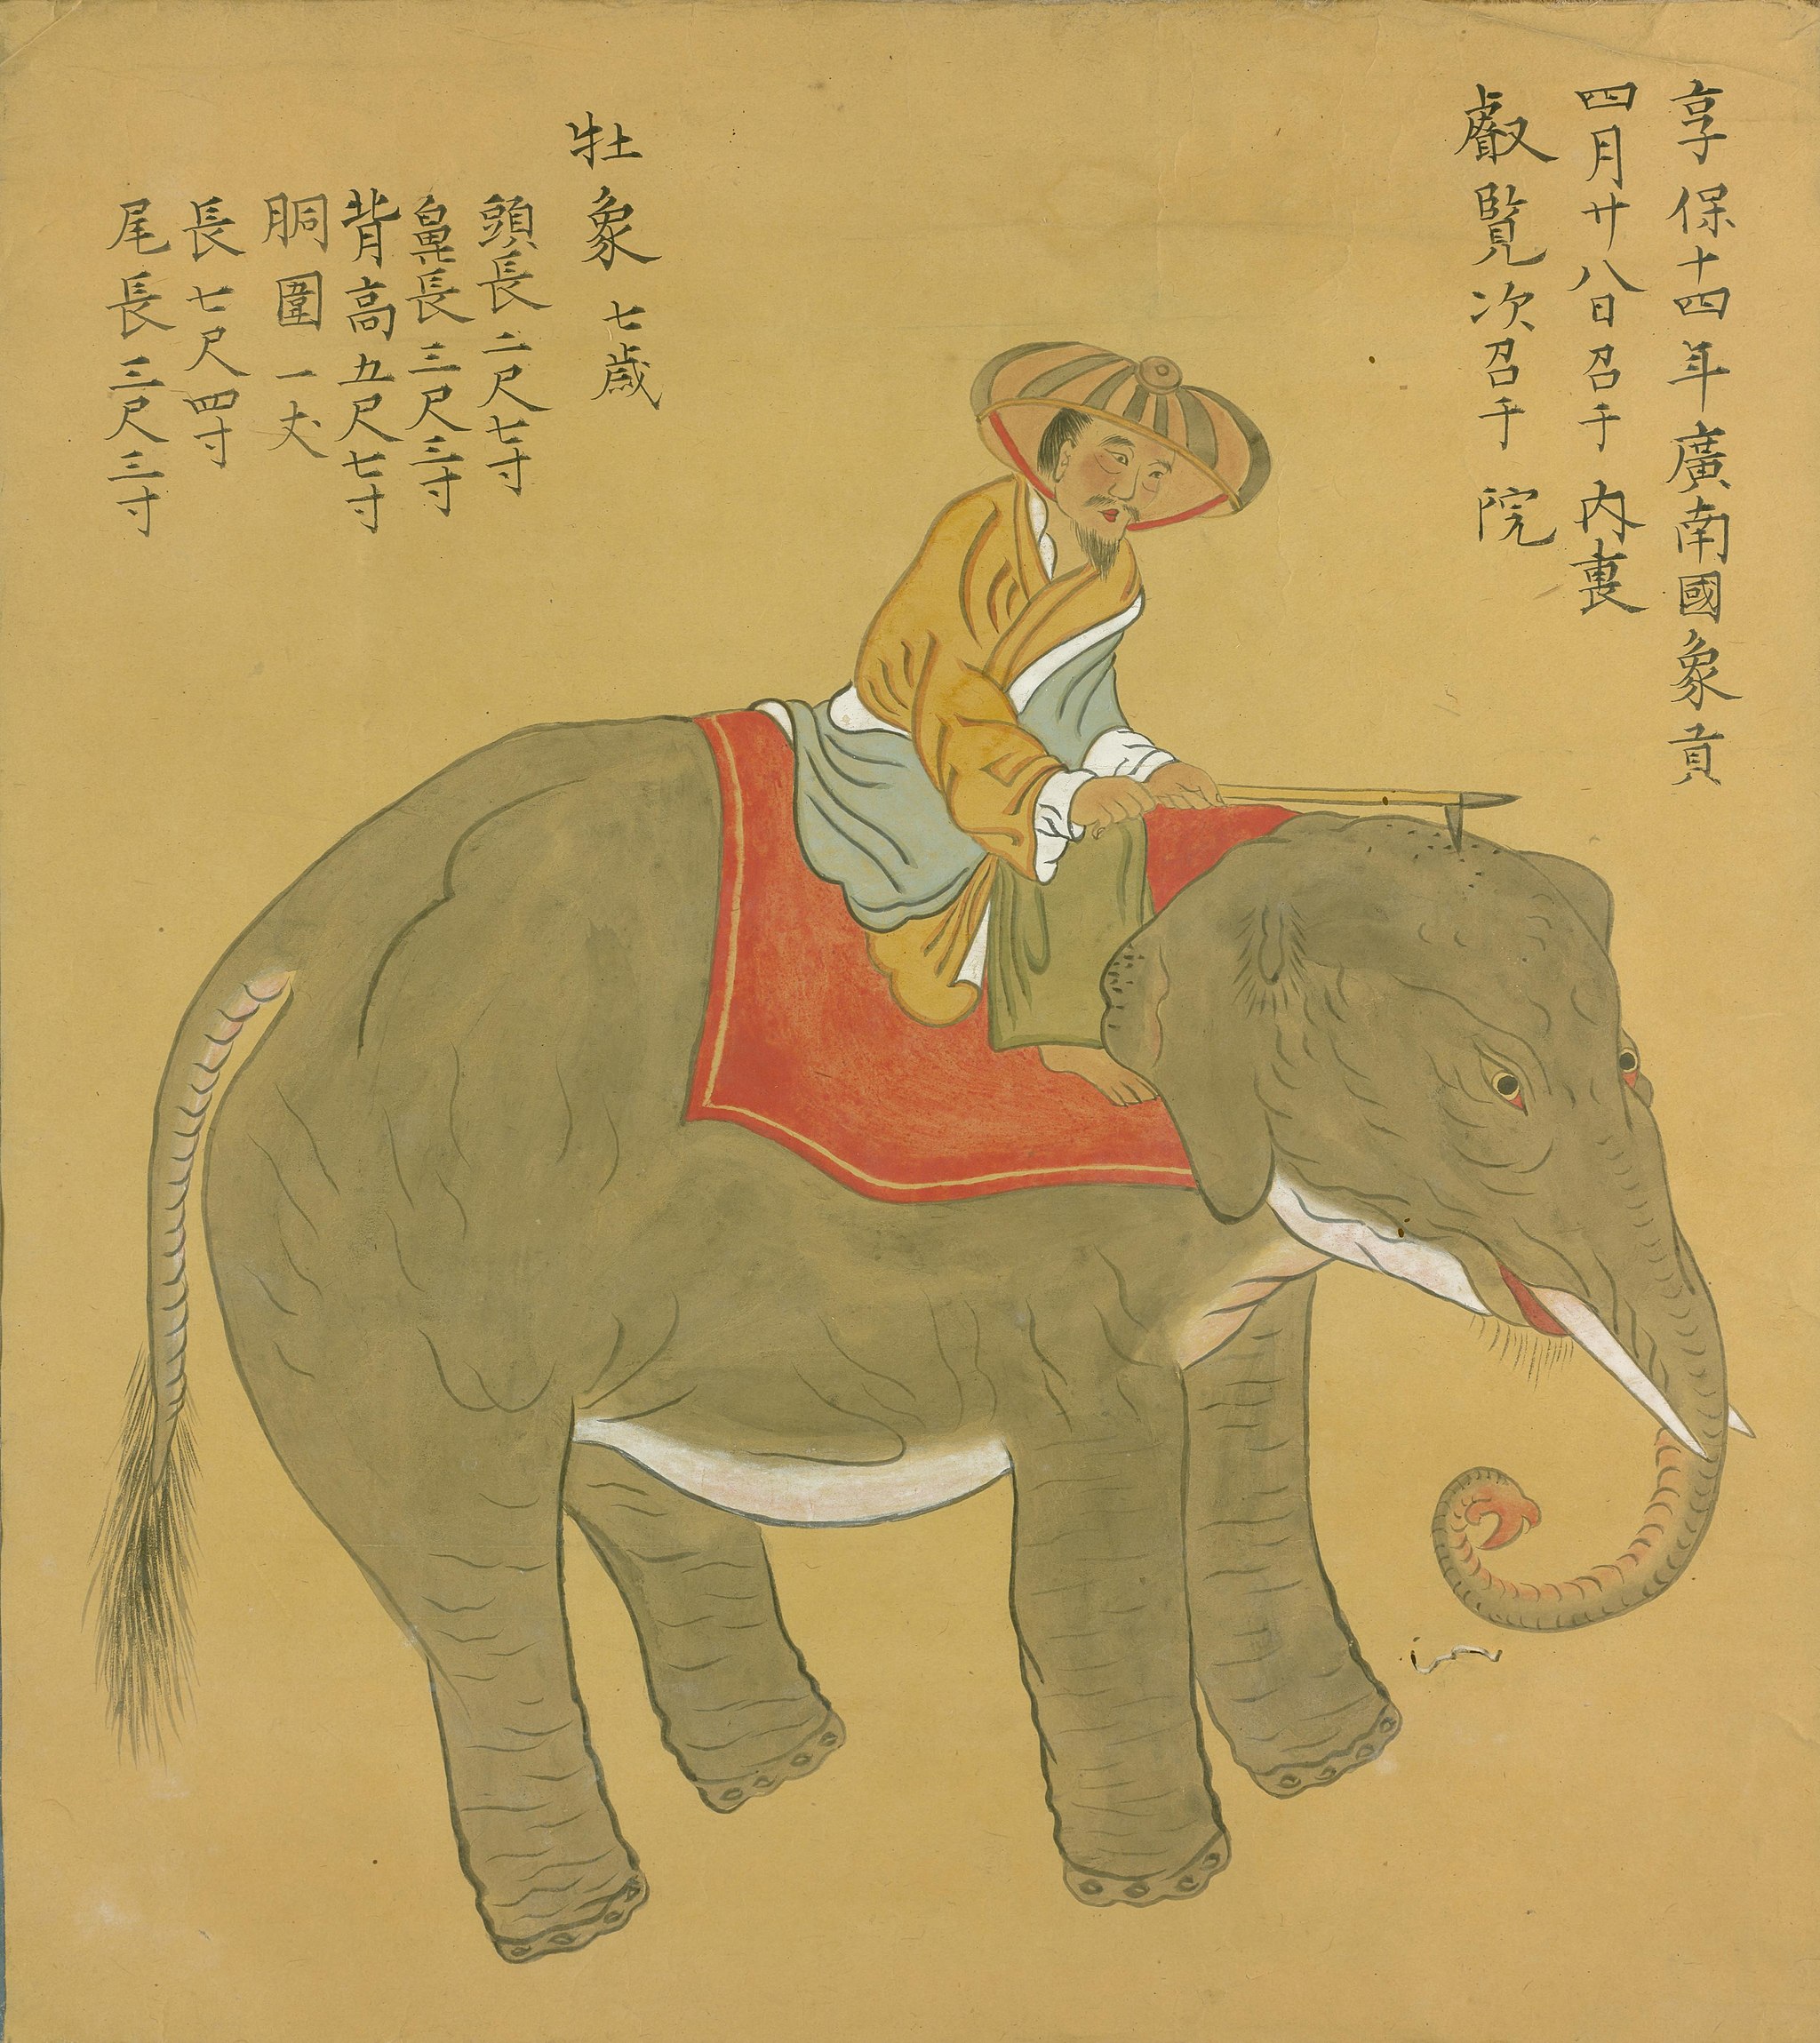 Elephant ridden by mahout.